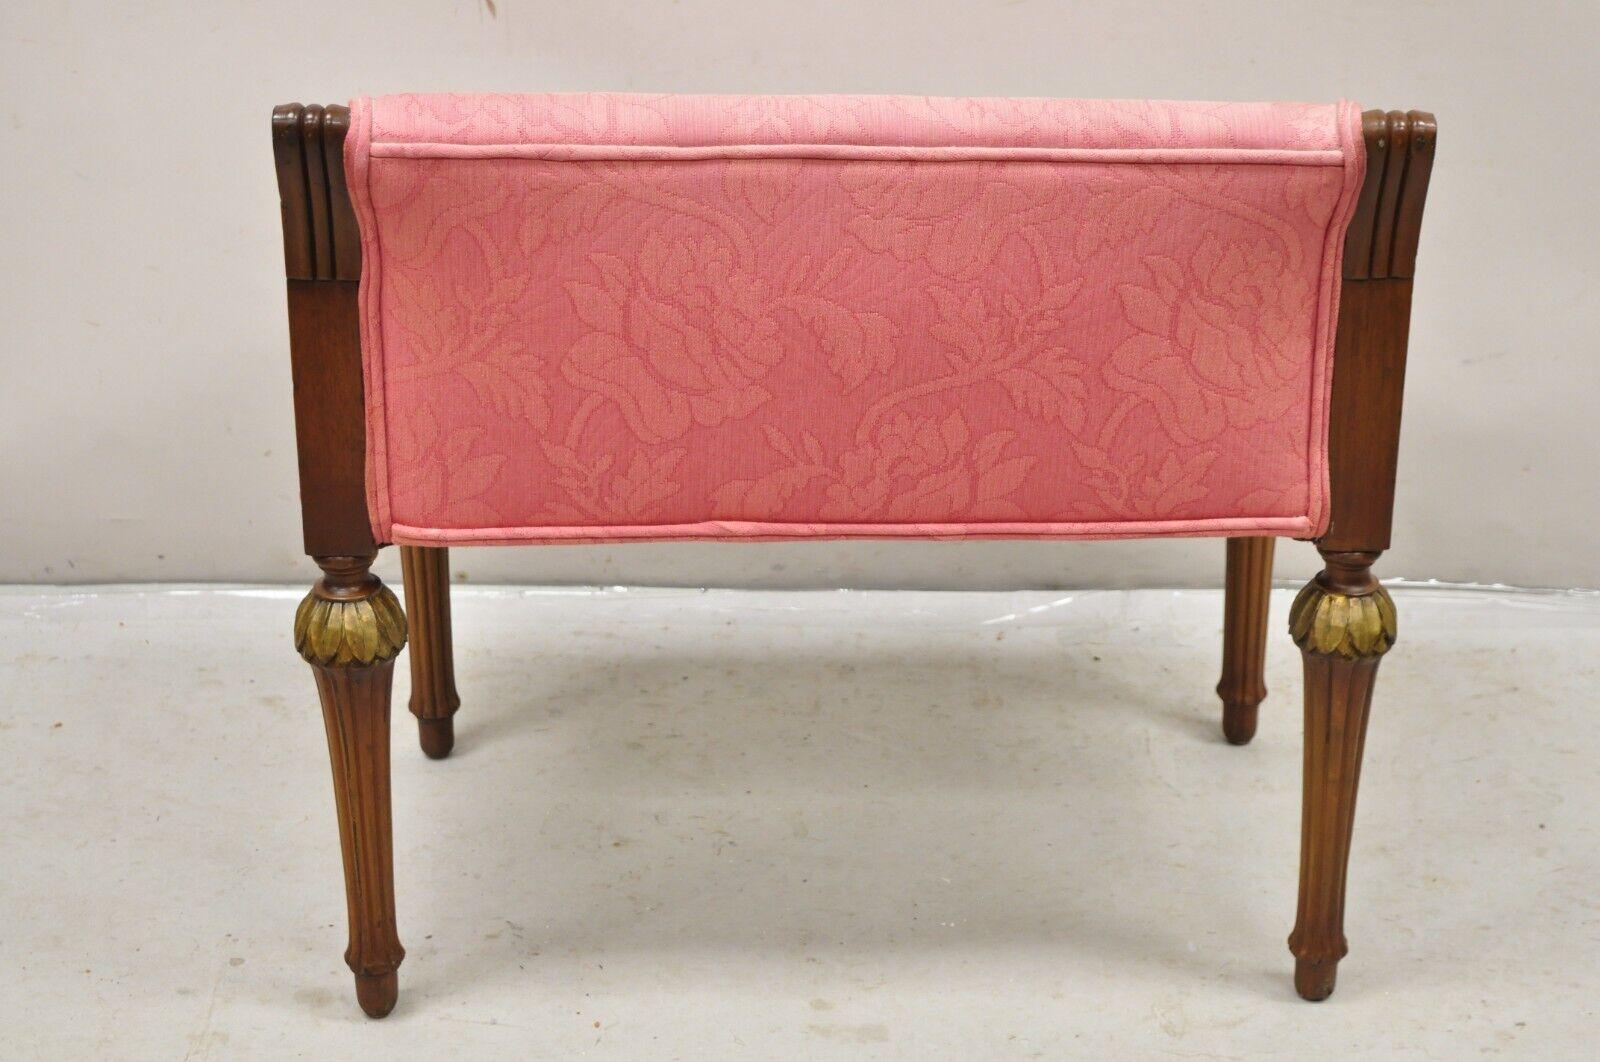 Vintage French Louis XVI Style Pink Vanity Chair Bench Seat w/ Swan Carved Arms 1